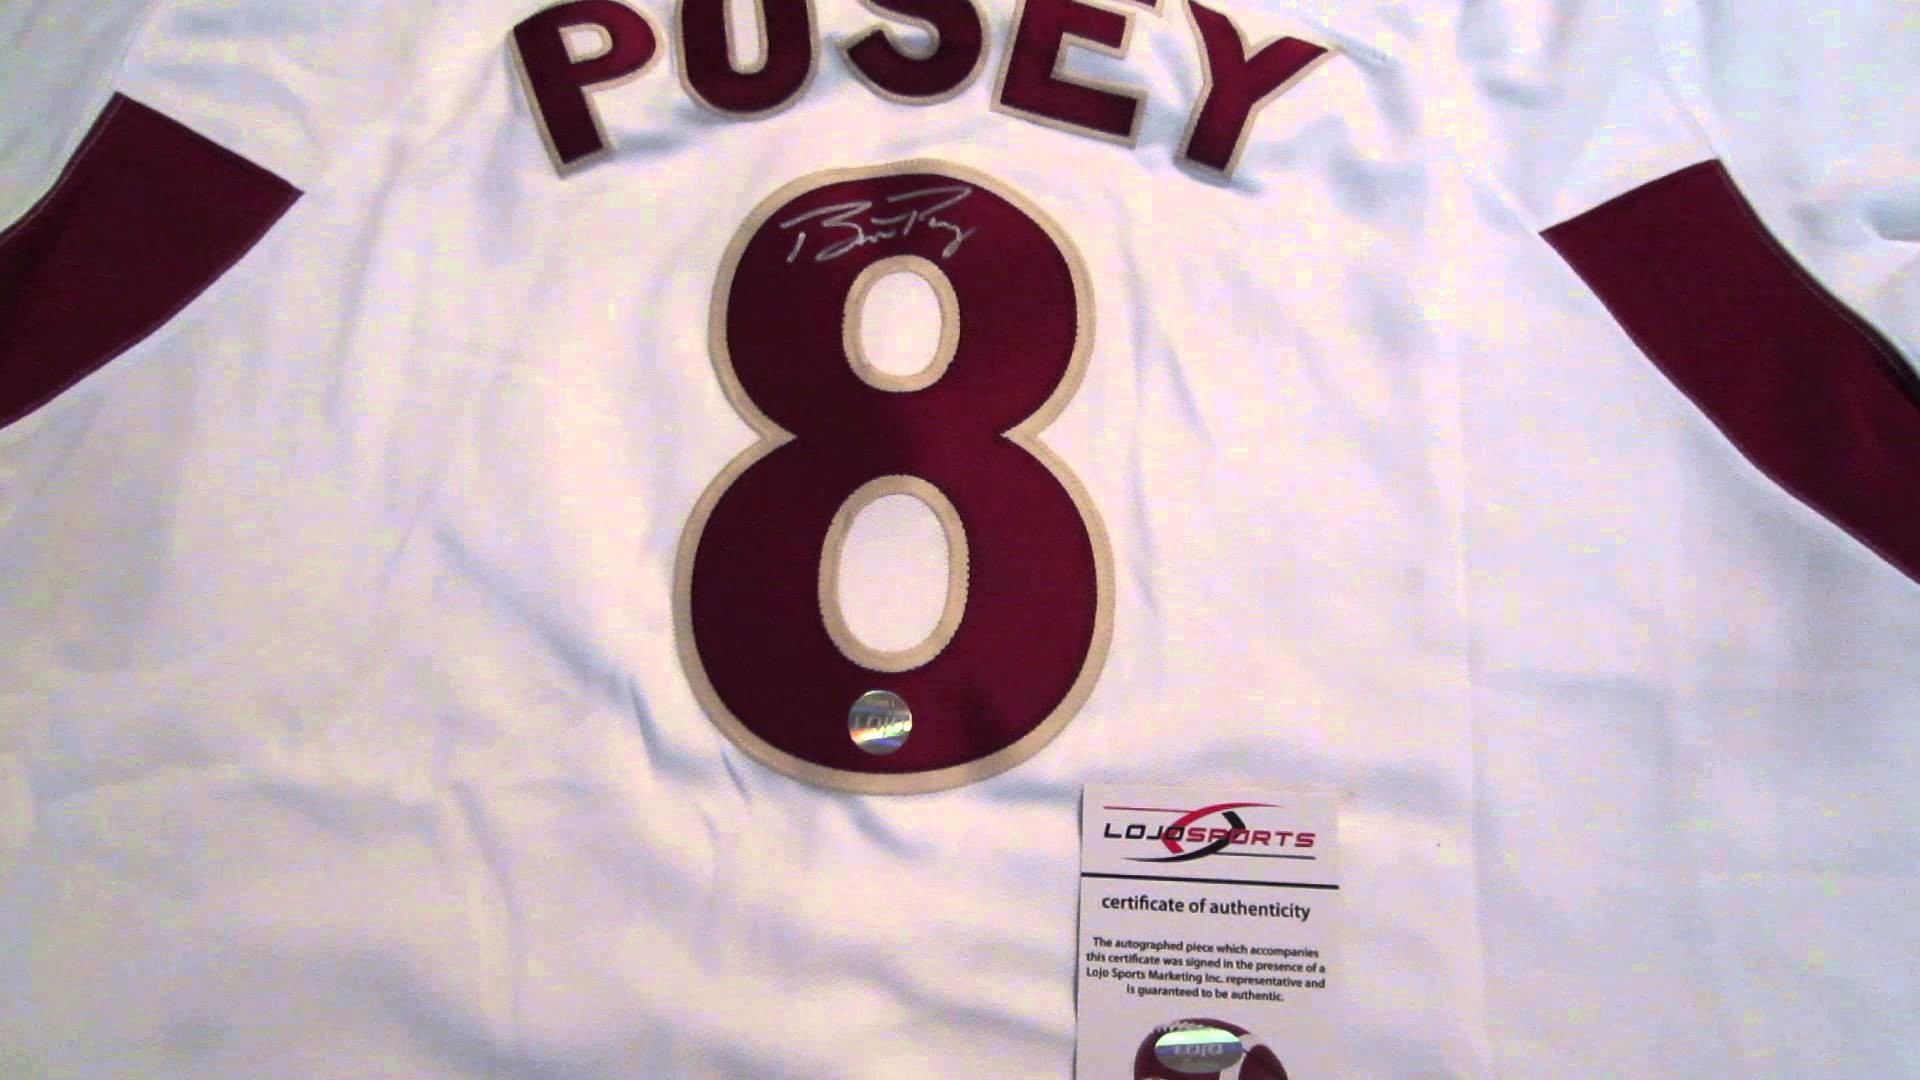 1920x1080 Buster Posey Autographed Florida State Baseball Jersey FSU Giants Star  Catcher - YouTube